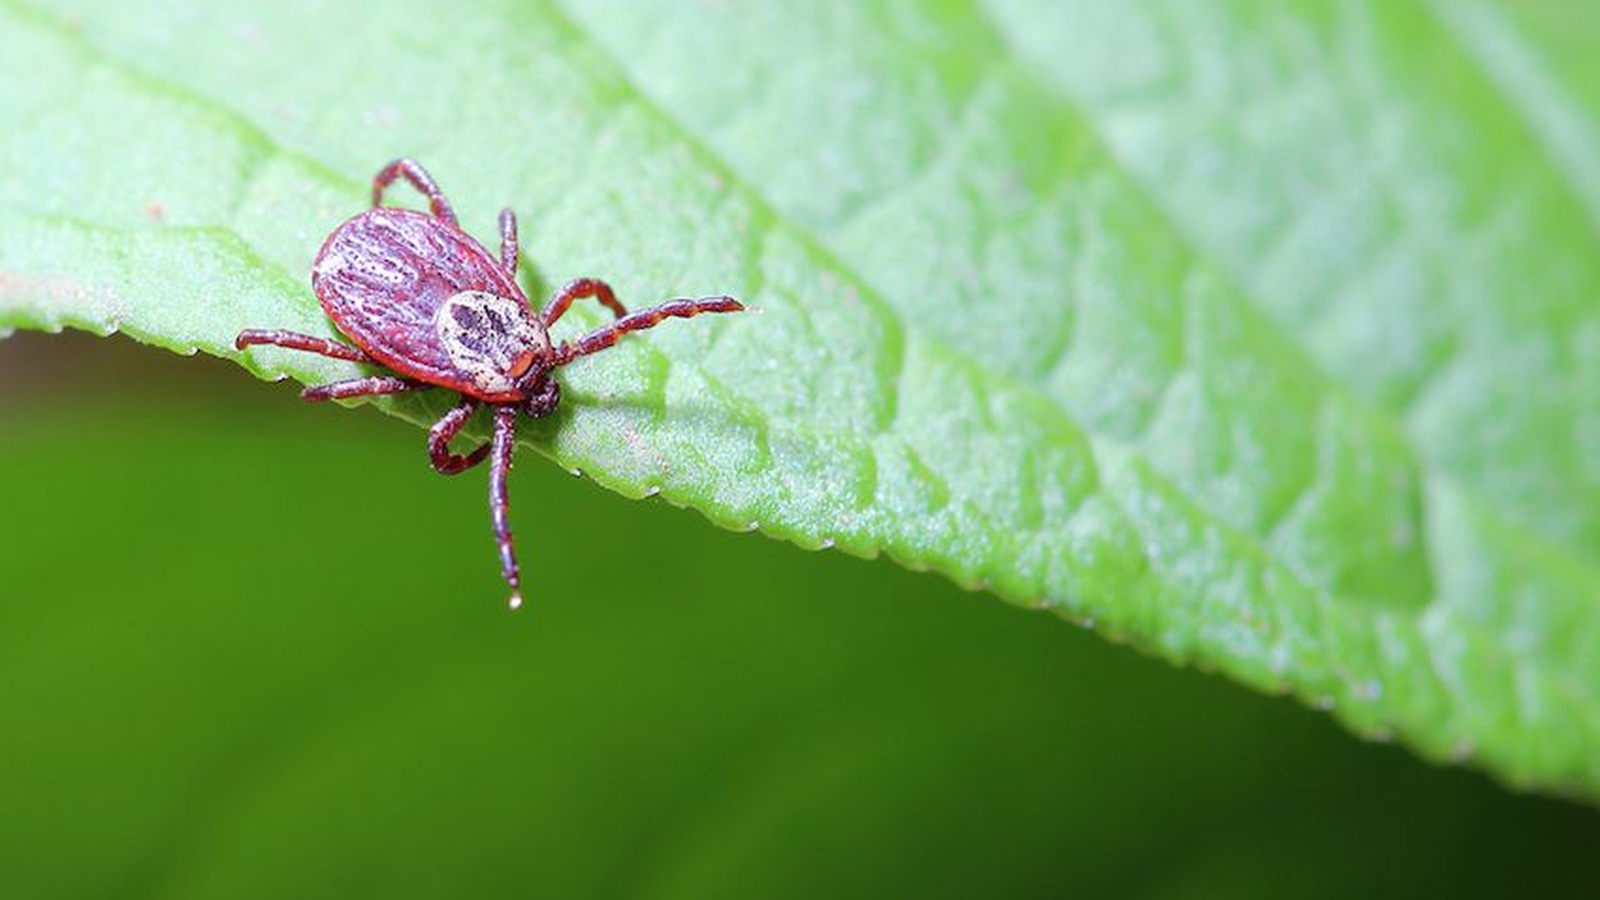 A New Cause Of Lyme Disease Discovered!